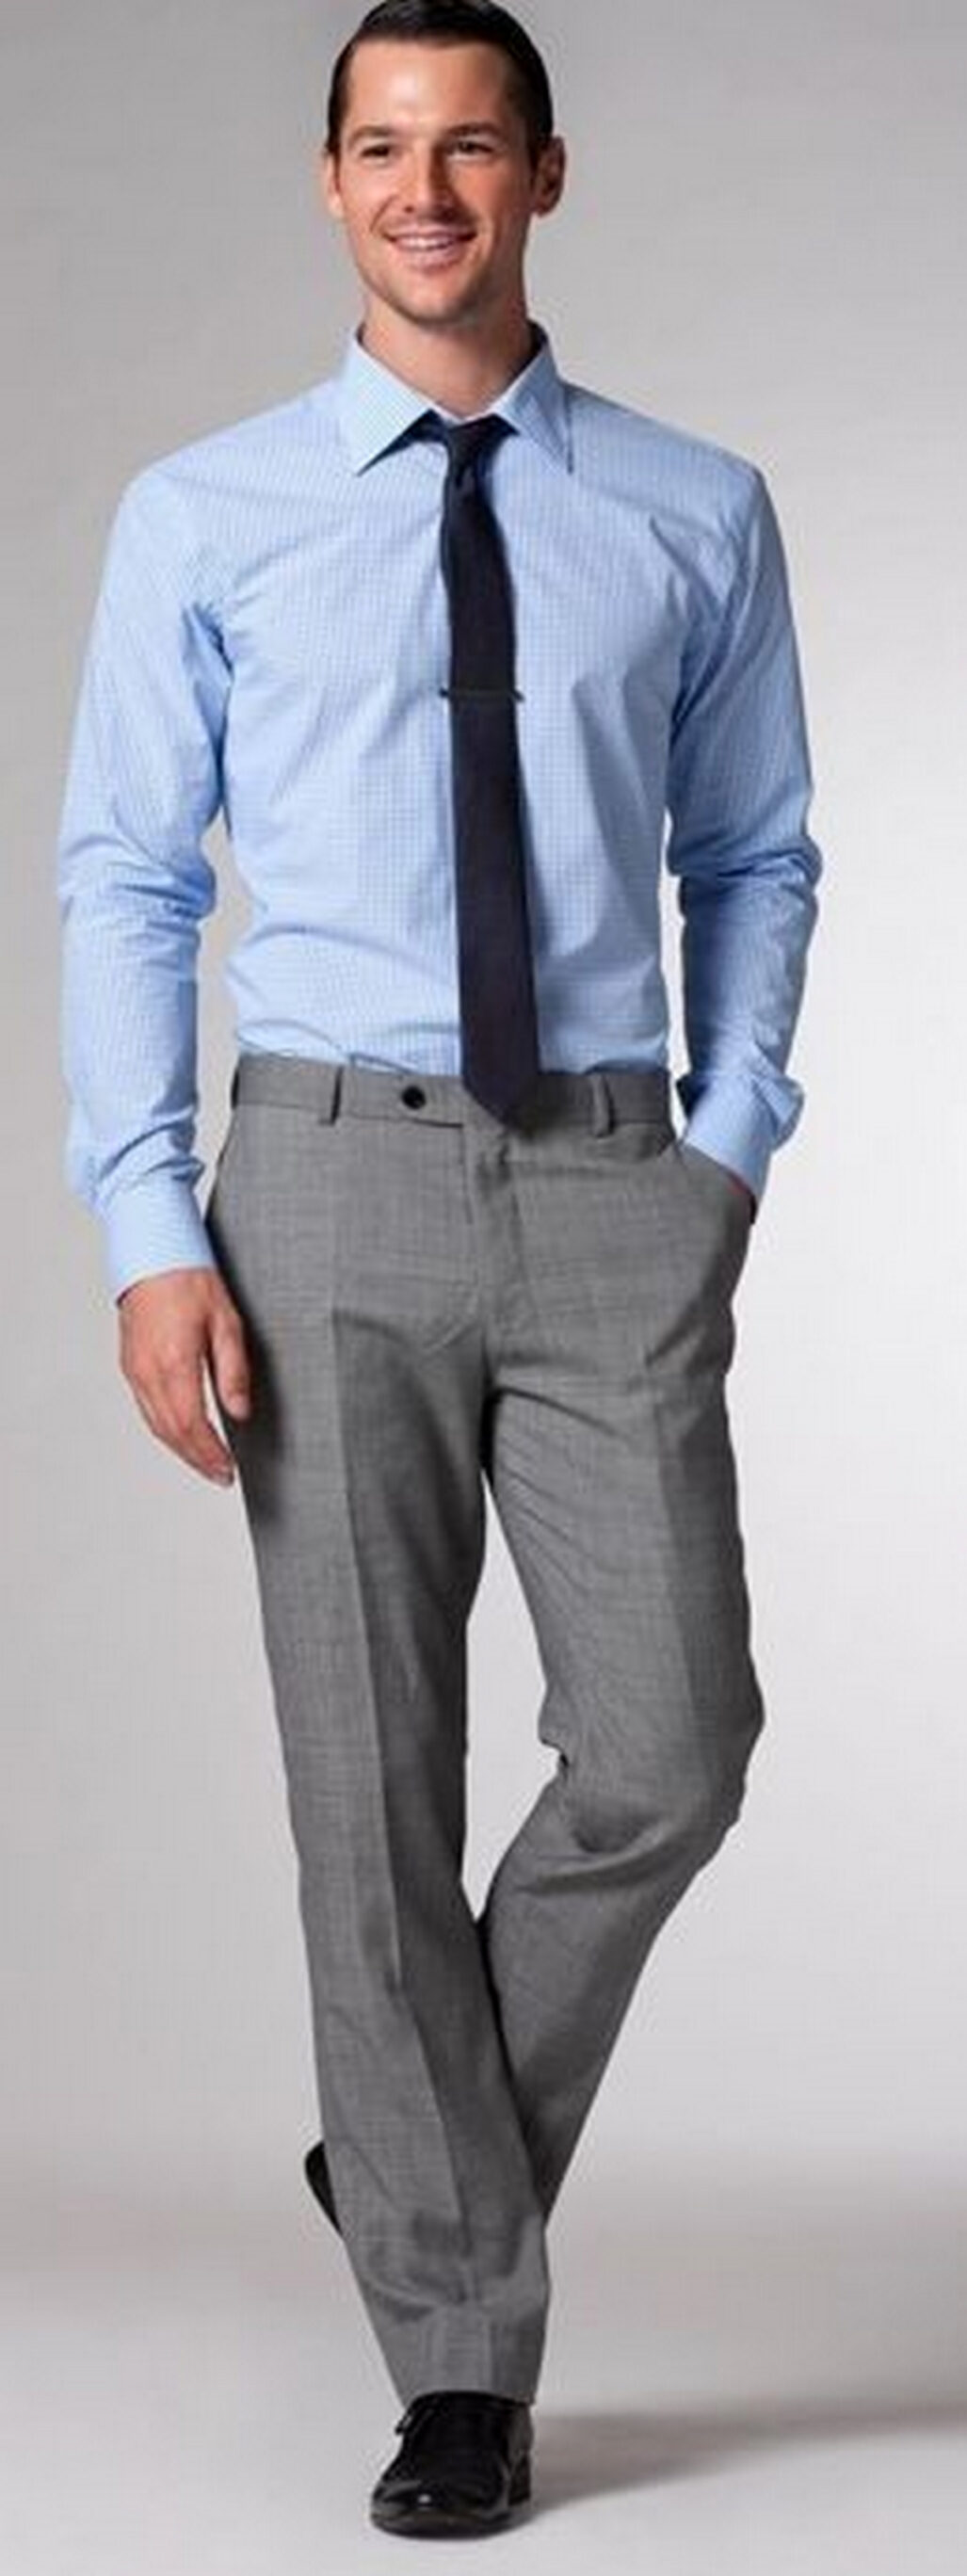 What color pants matches with a gray shirt? - Quora